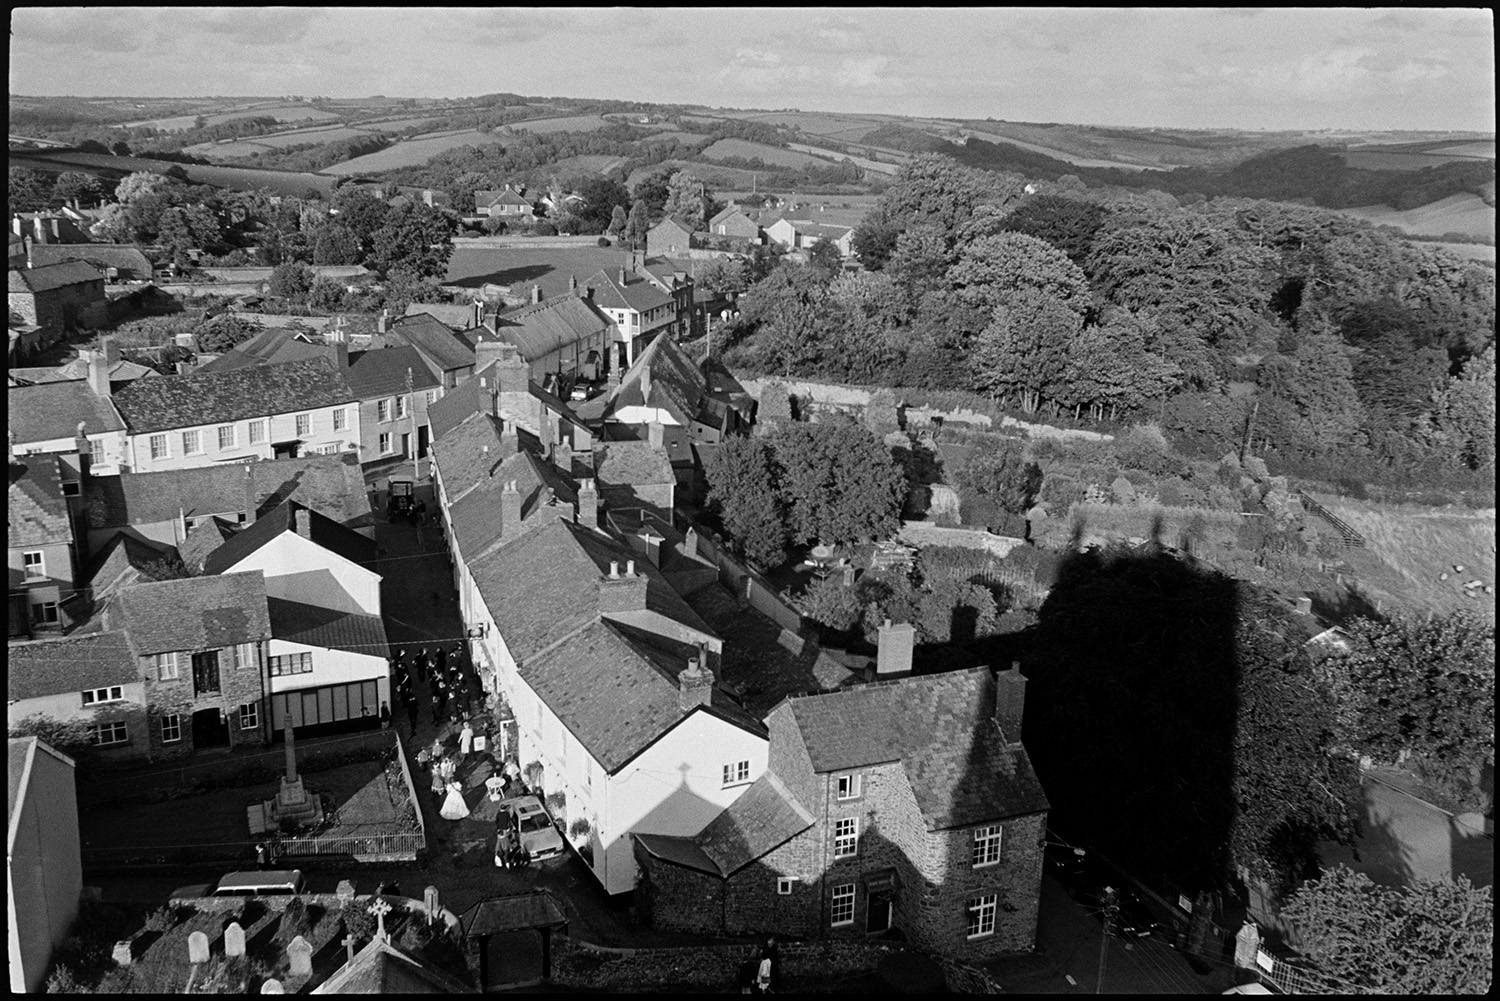 A view from Chulmleigh Church tower of houses in the town below. The Fair Queen can be seen processing behind a brass band, past the war memorial, to Chulmleigh Fair.